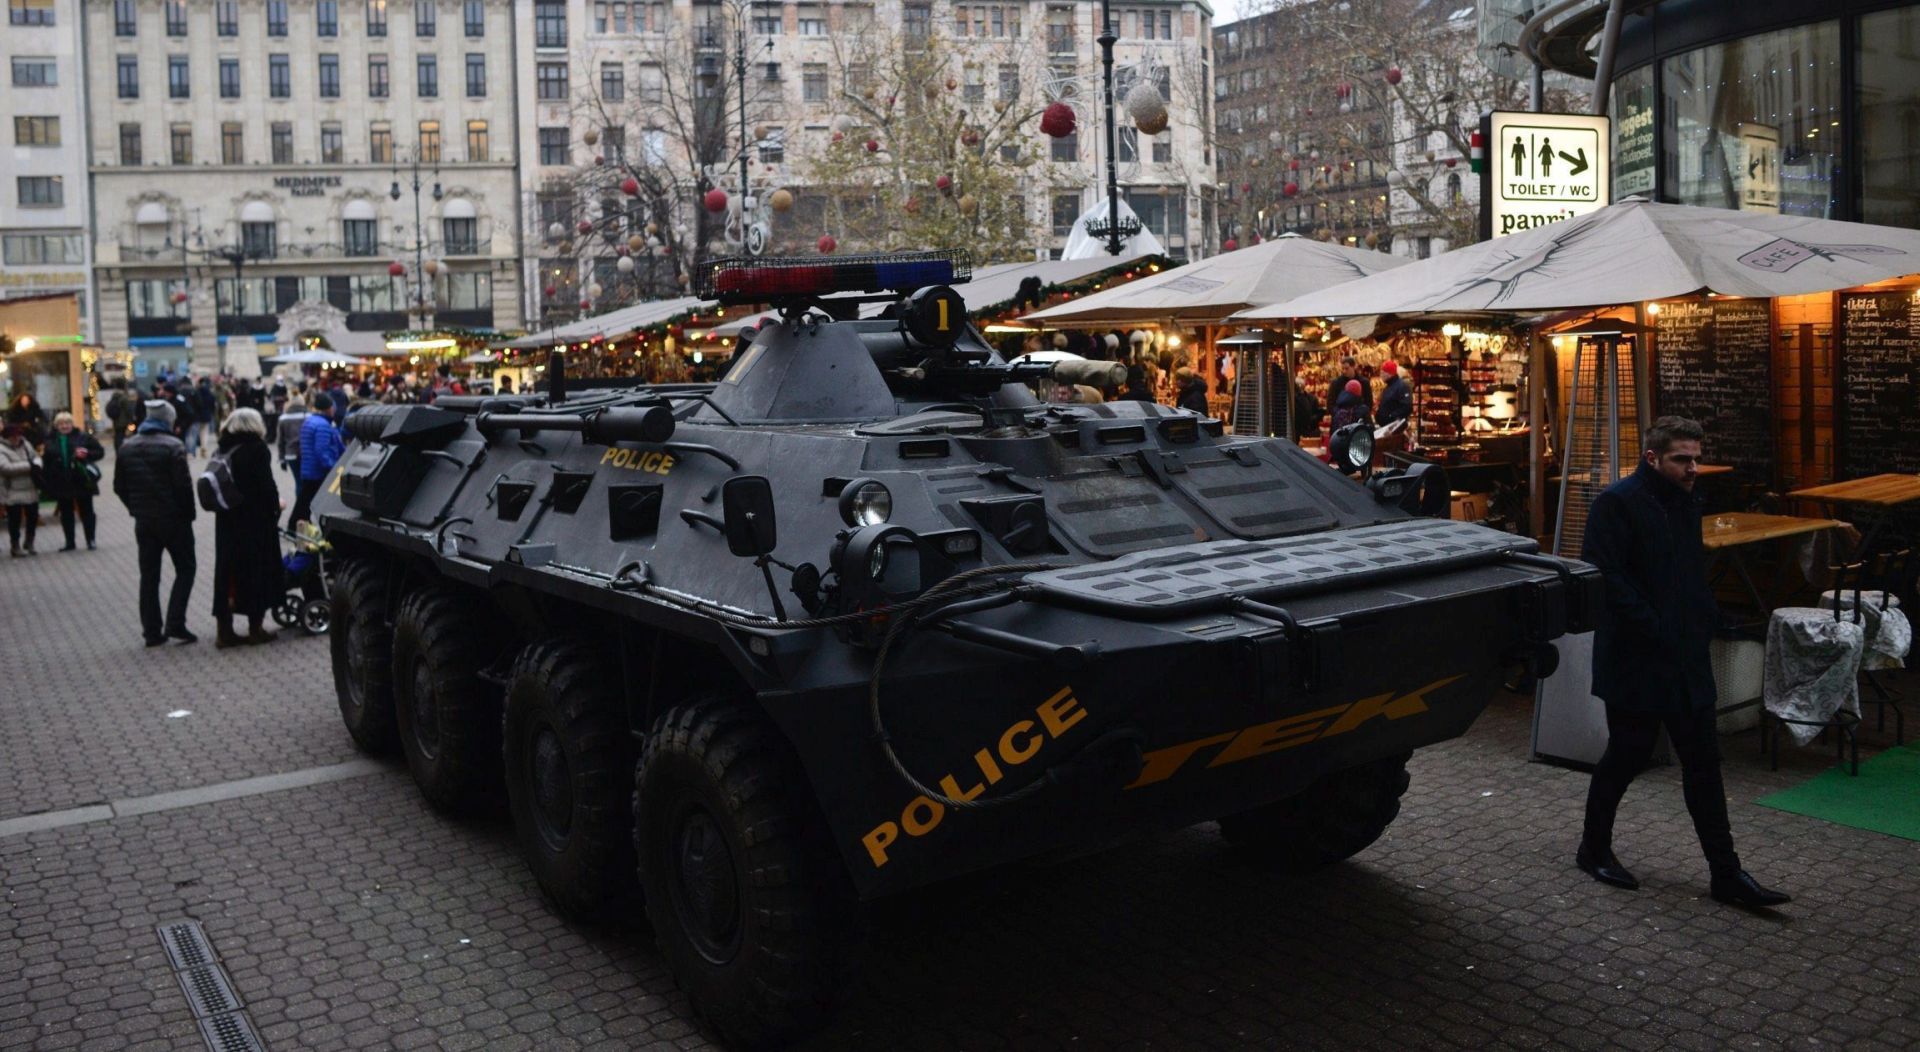 epa05683617 A passer-by walks past an armoured vehicle of the Counter Terrorism Centre of the Hungarian police standing guard at a Christmas market in downtown Budapest, Hungary, 20 December 2016. Security has been beefed up at venues visited by large number of people after at least 12 people were killed and dozens injured when a truck on 19 December drove into the Christmas market at Breitscheidplatz in Berlin, in what authorities believe was a deliberate attack.  EPA/Janos Marjai HUNGARY OUT